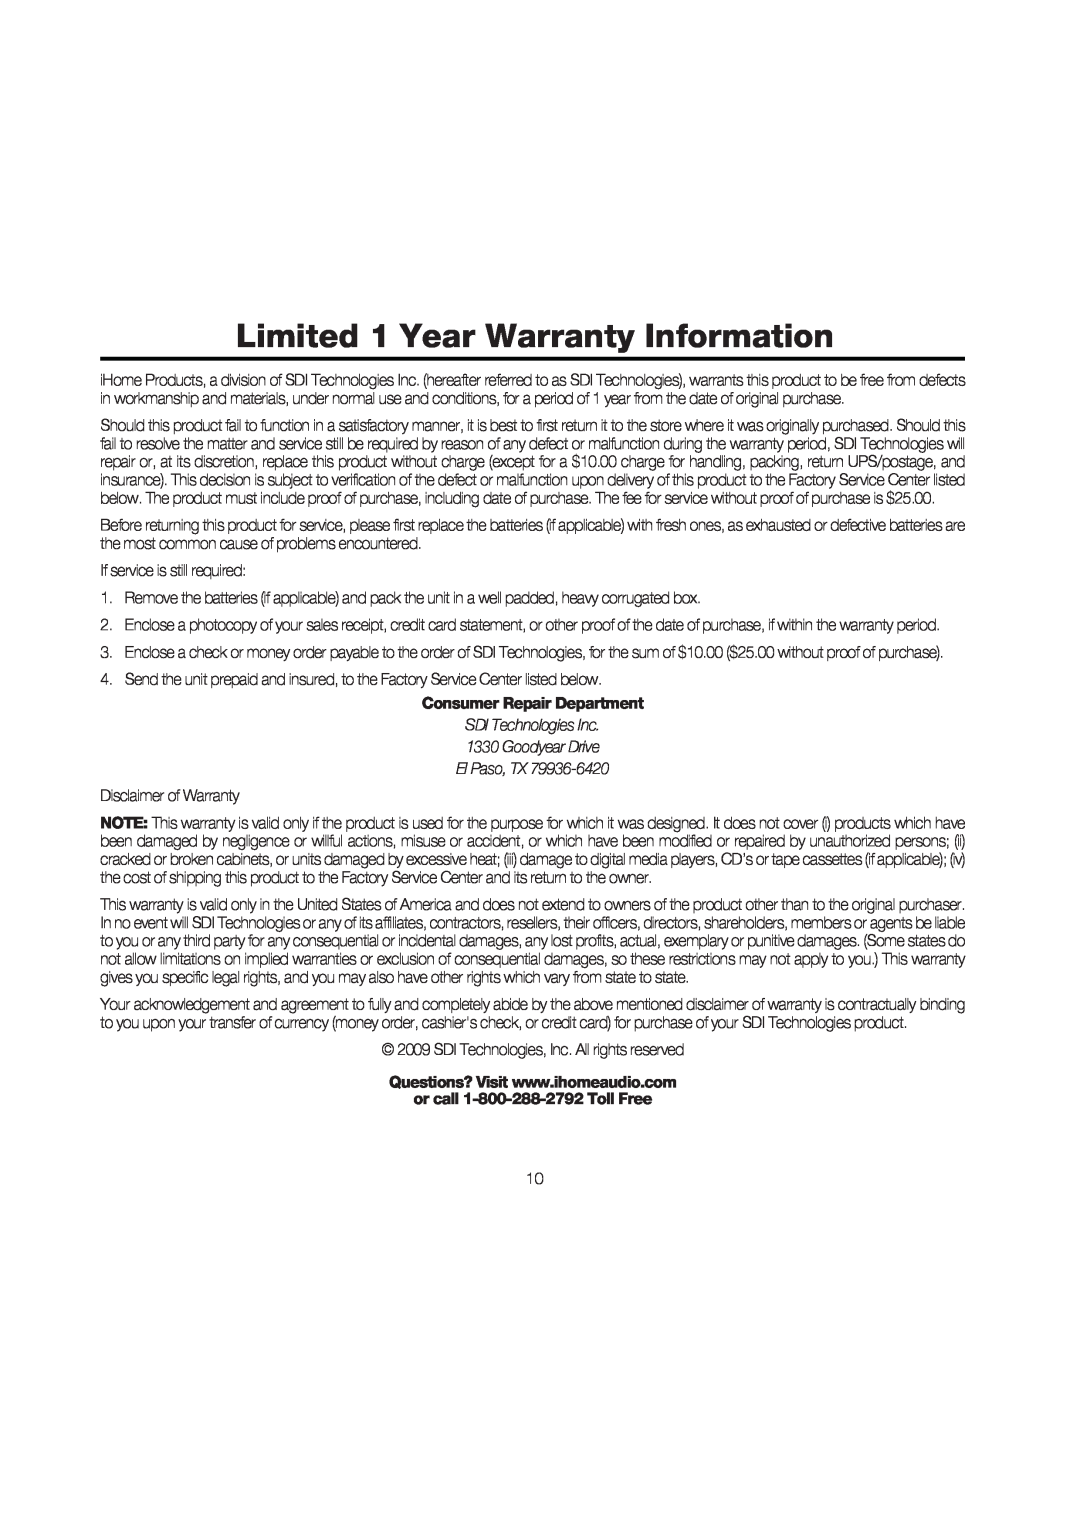 iHome iP40 manual Limited 1 Year Warranty Information, If service is still required, Disclaimer of Warranty 